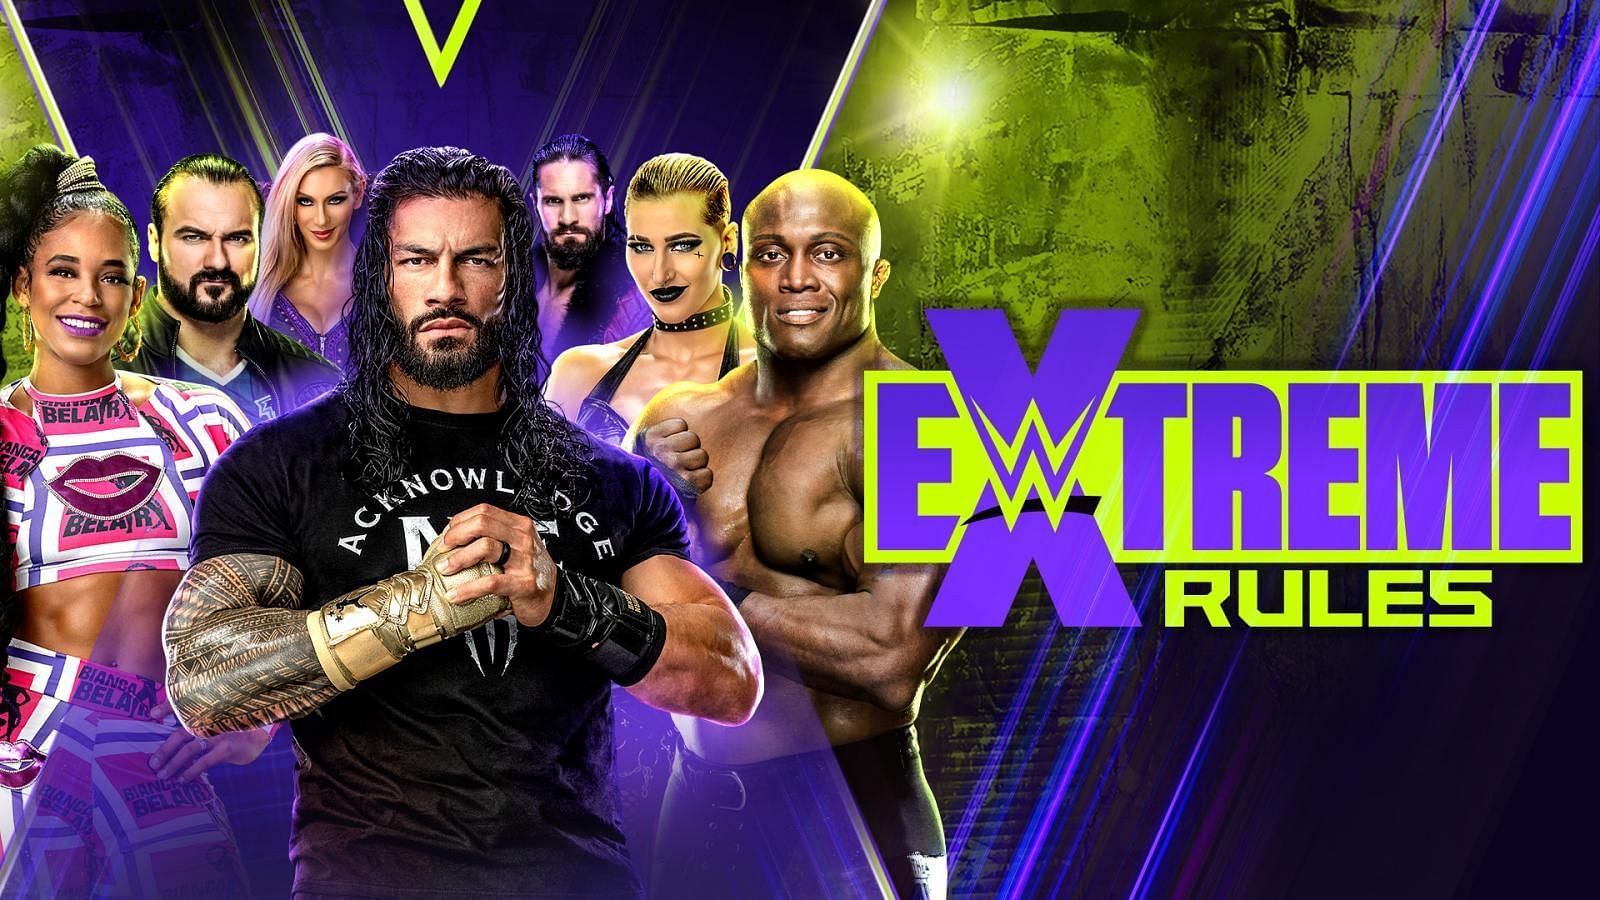 Extreme Rules will take place in Philadelphia